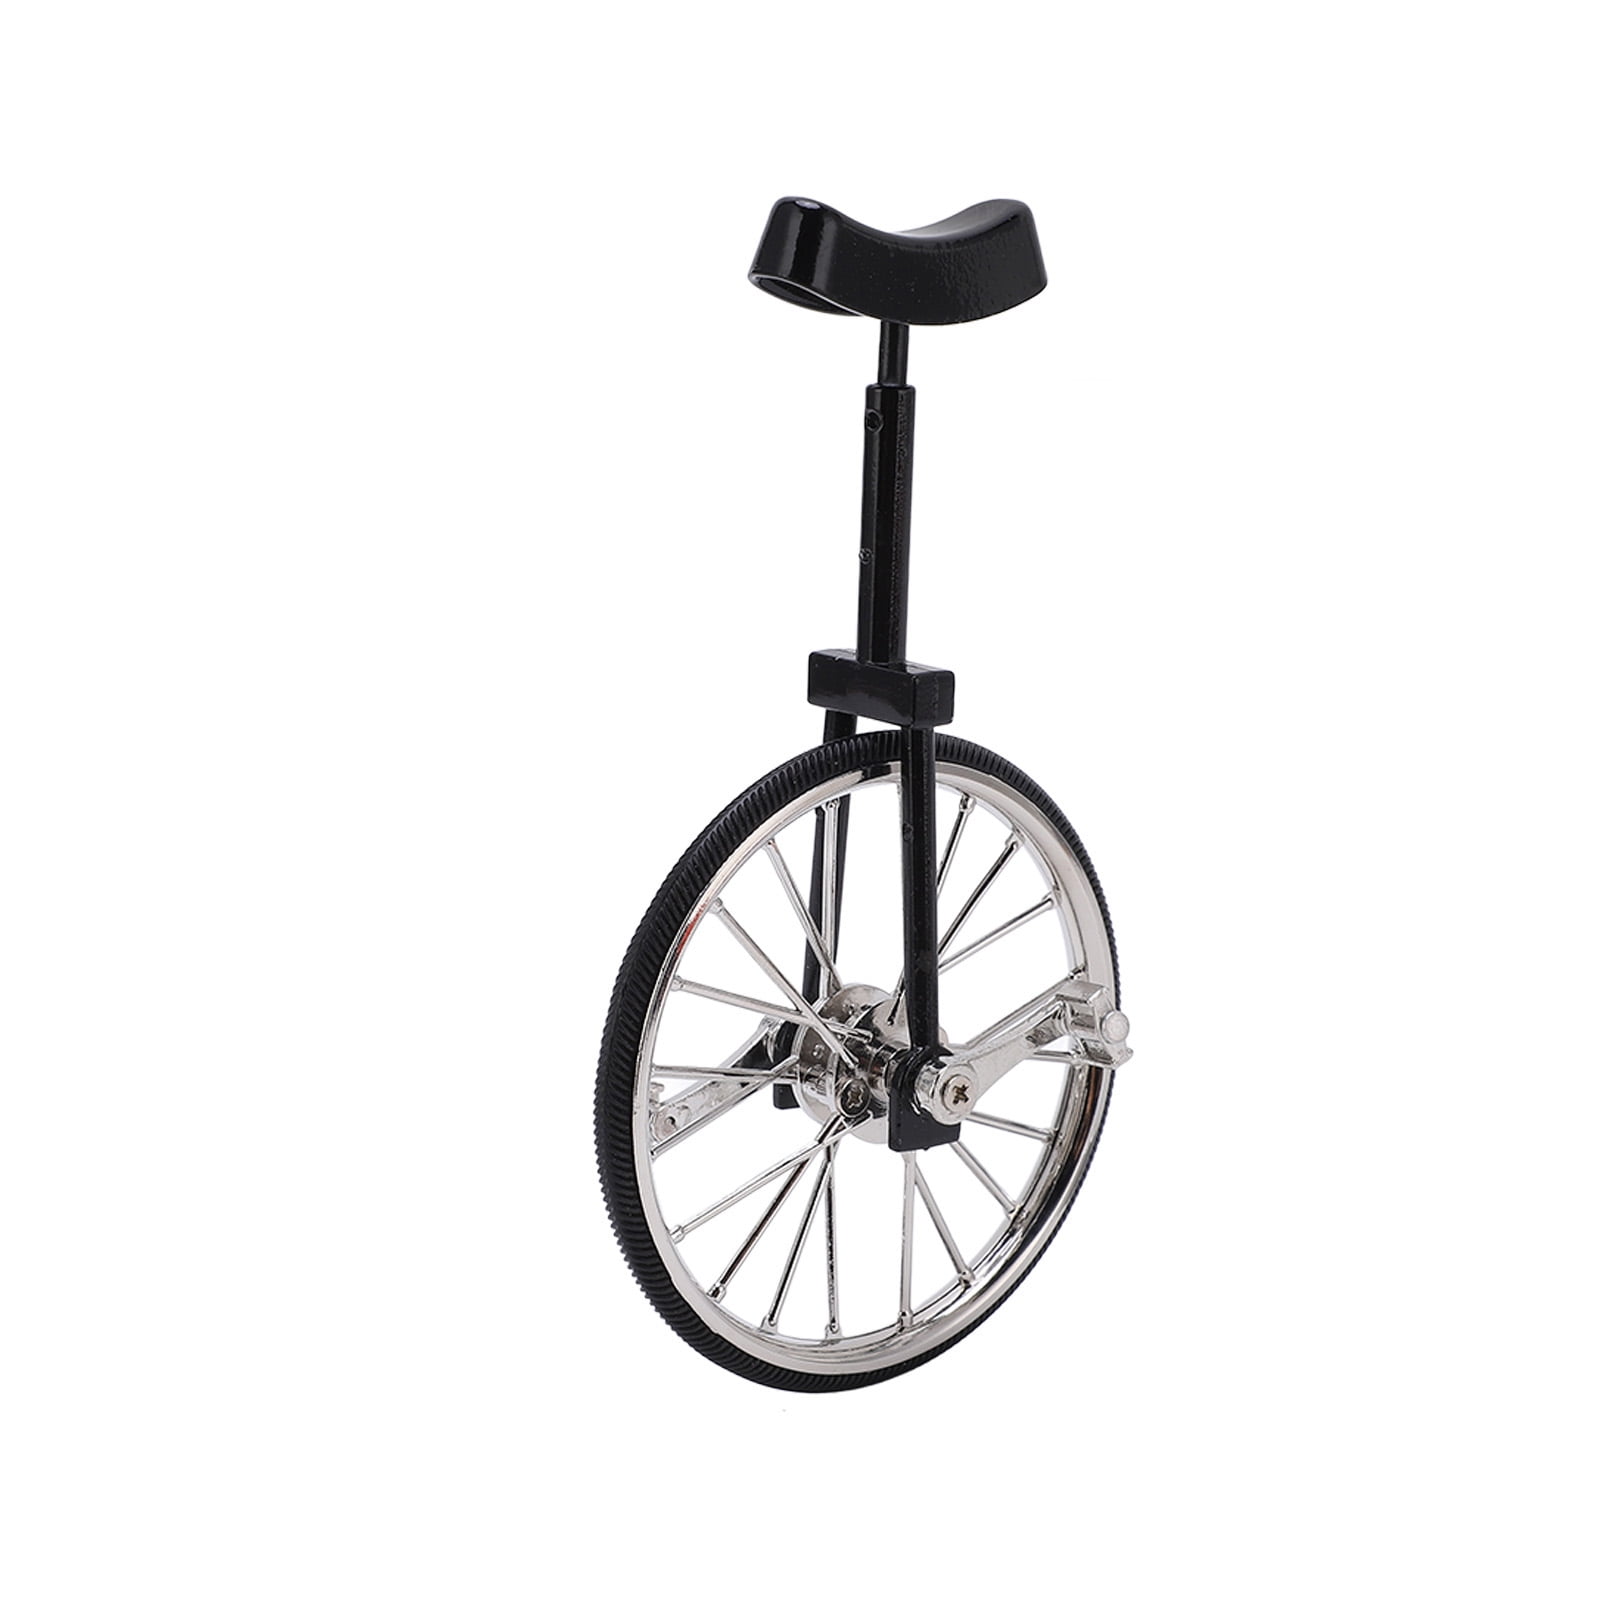 Details about   16-24" Wheel Unicycle w/ Skid Proof Moutain Tire Alloy Uni-cycle Cycling Bike 